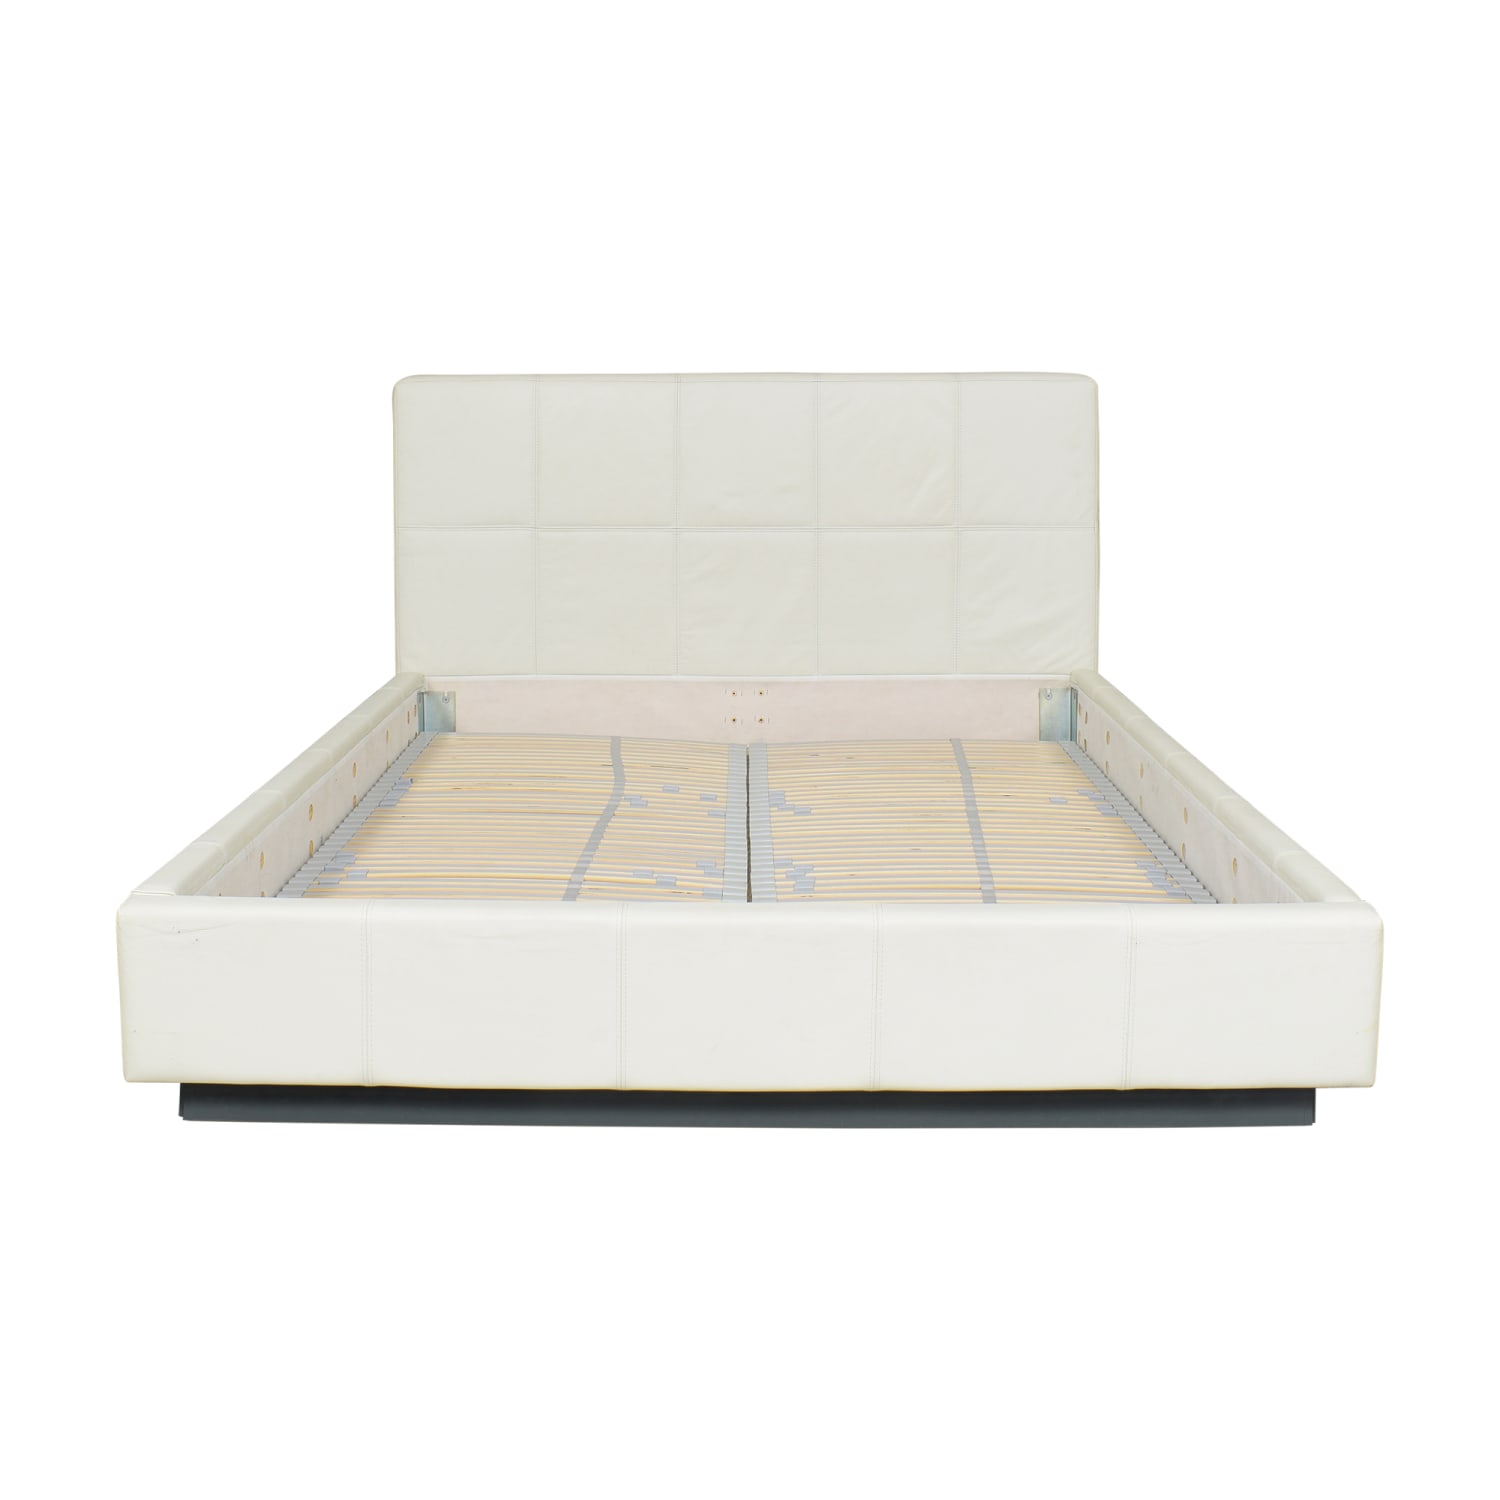 Affordable Queen Size Beds & Bed Frames - IKEA